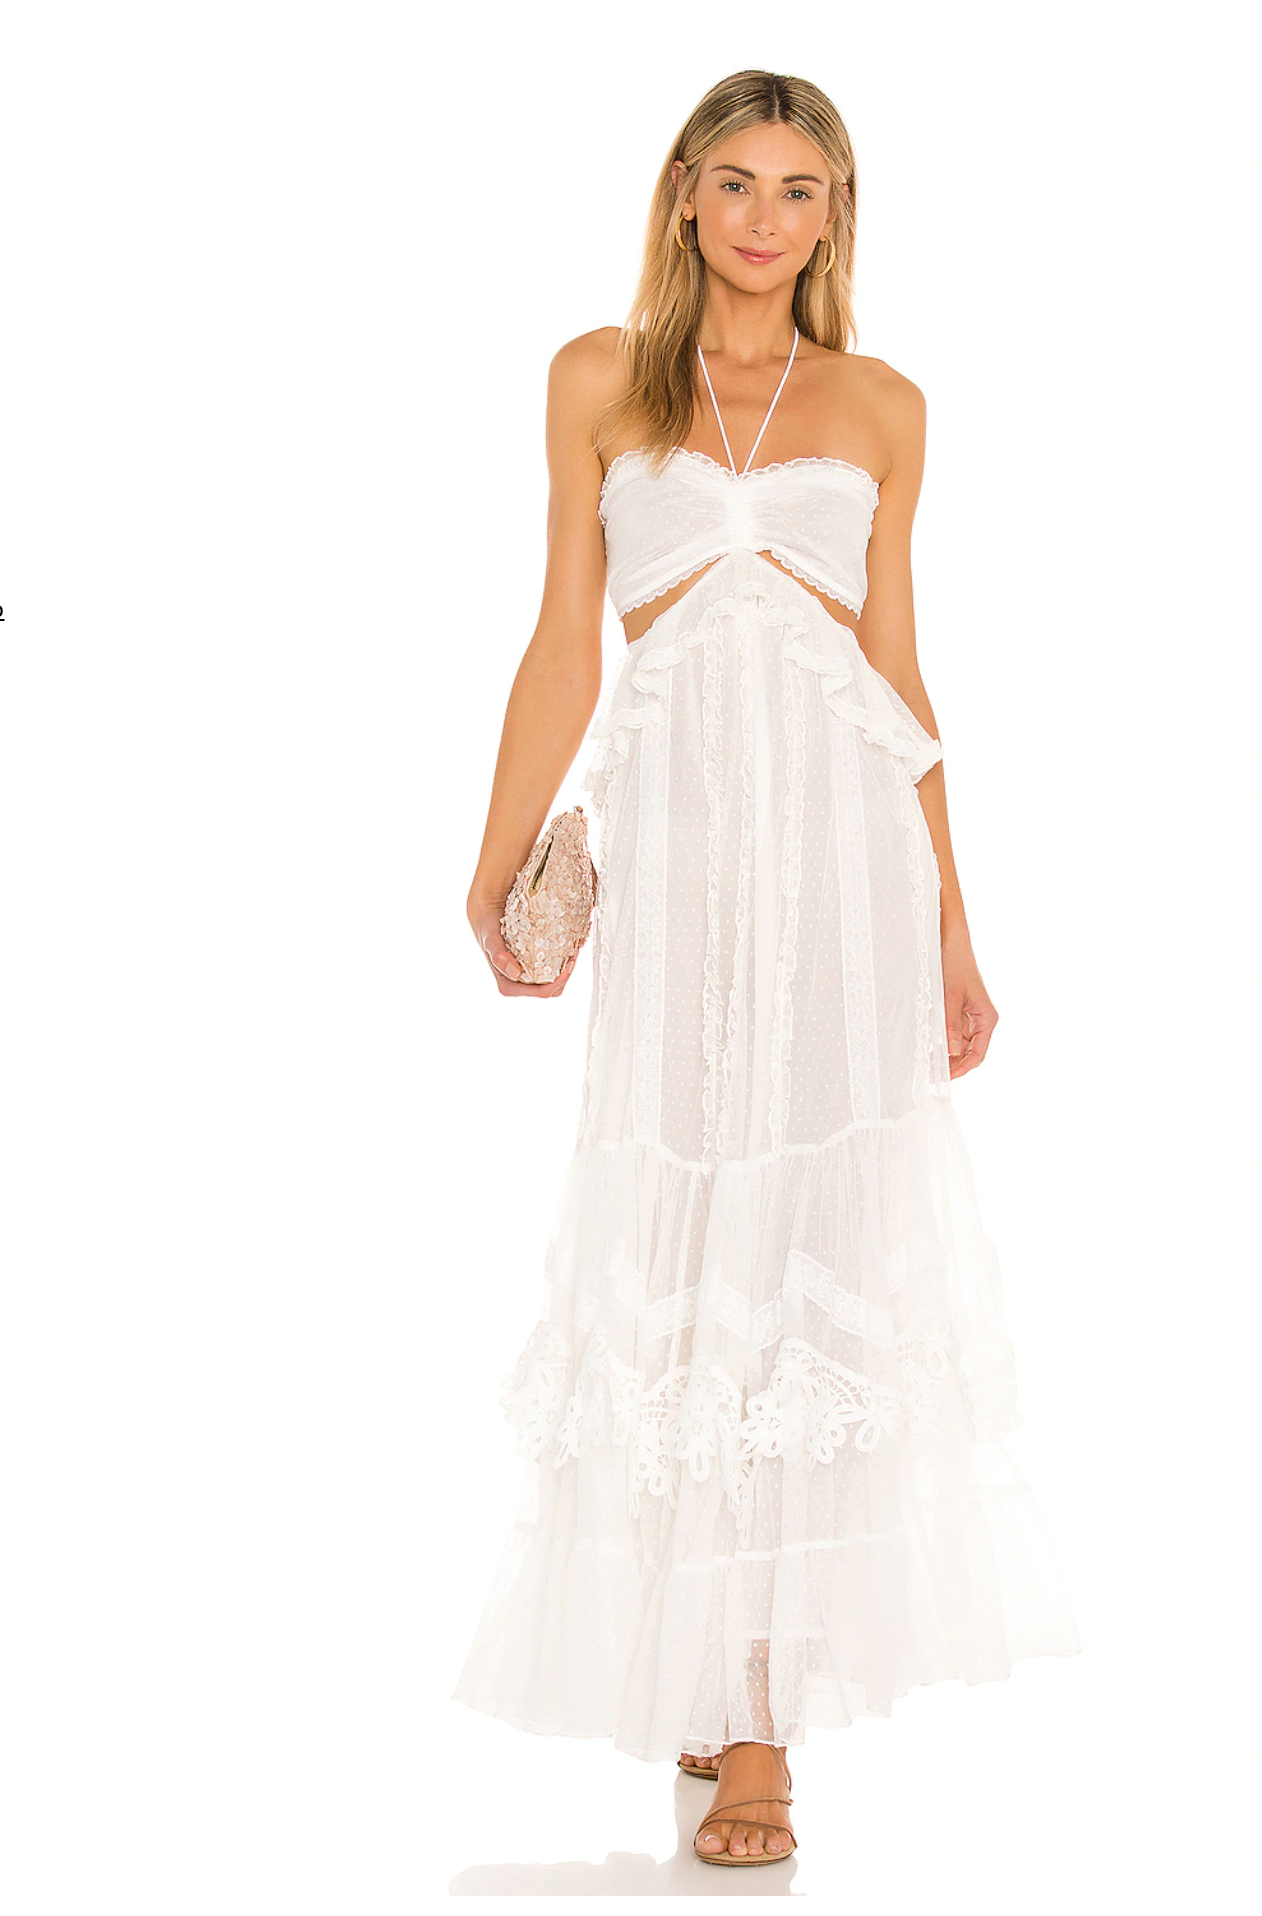 A halter tie flowy white dress with lace details for a bridal shower from REVOLVE.